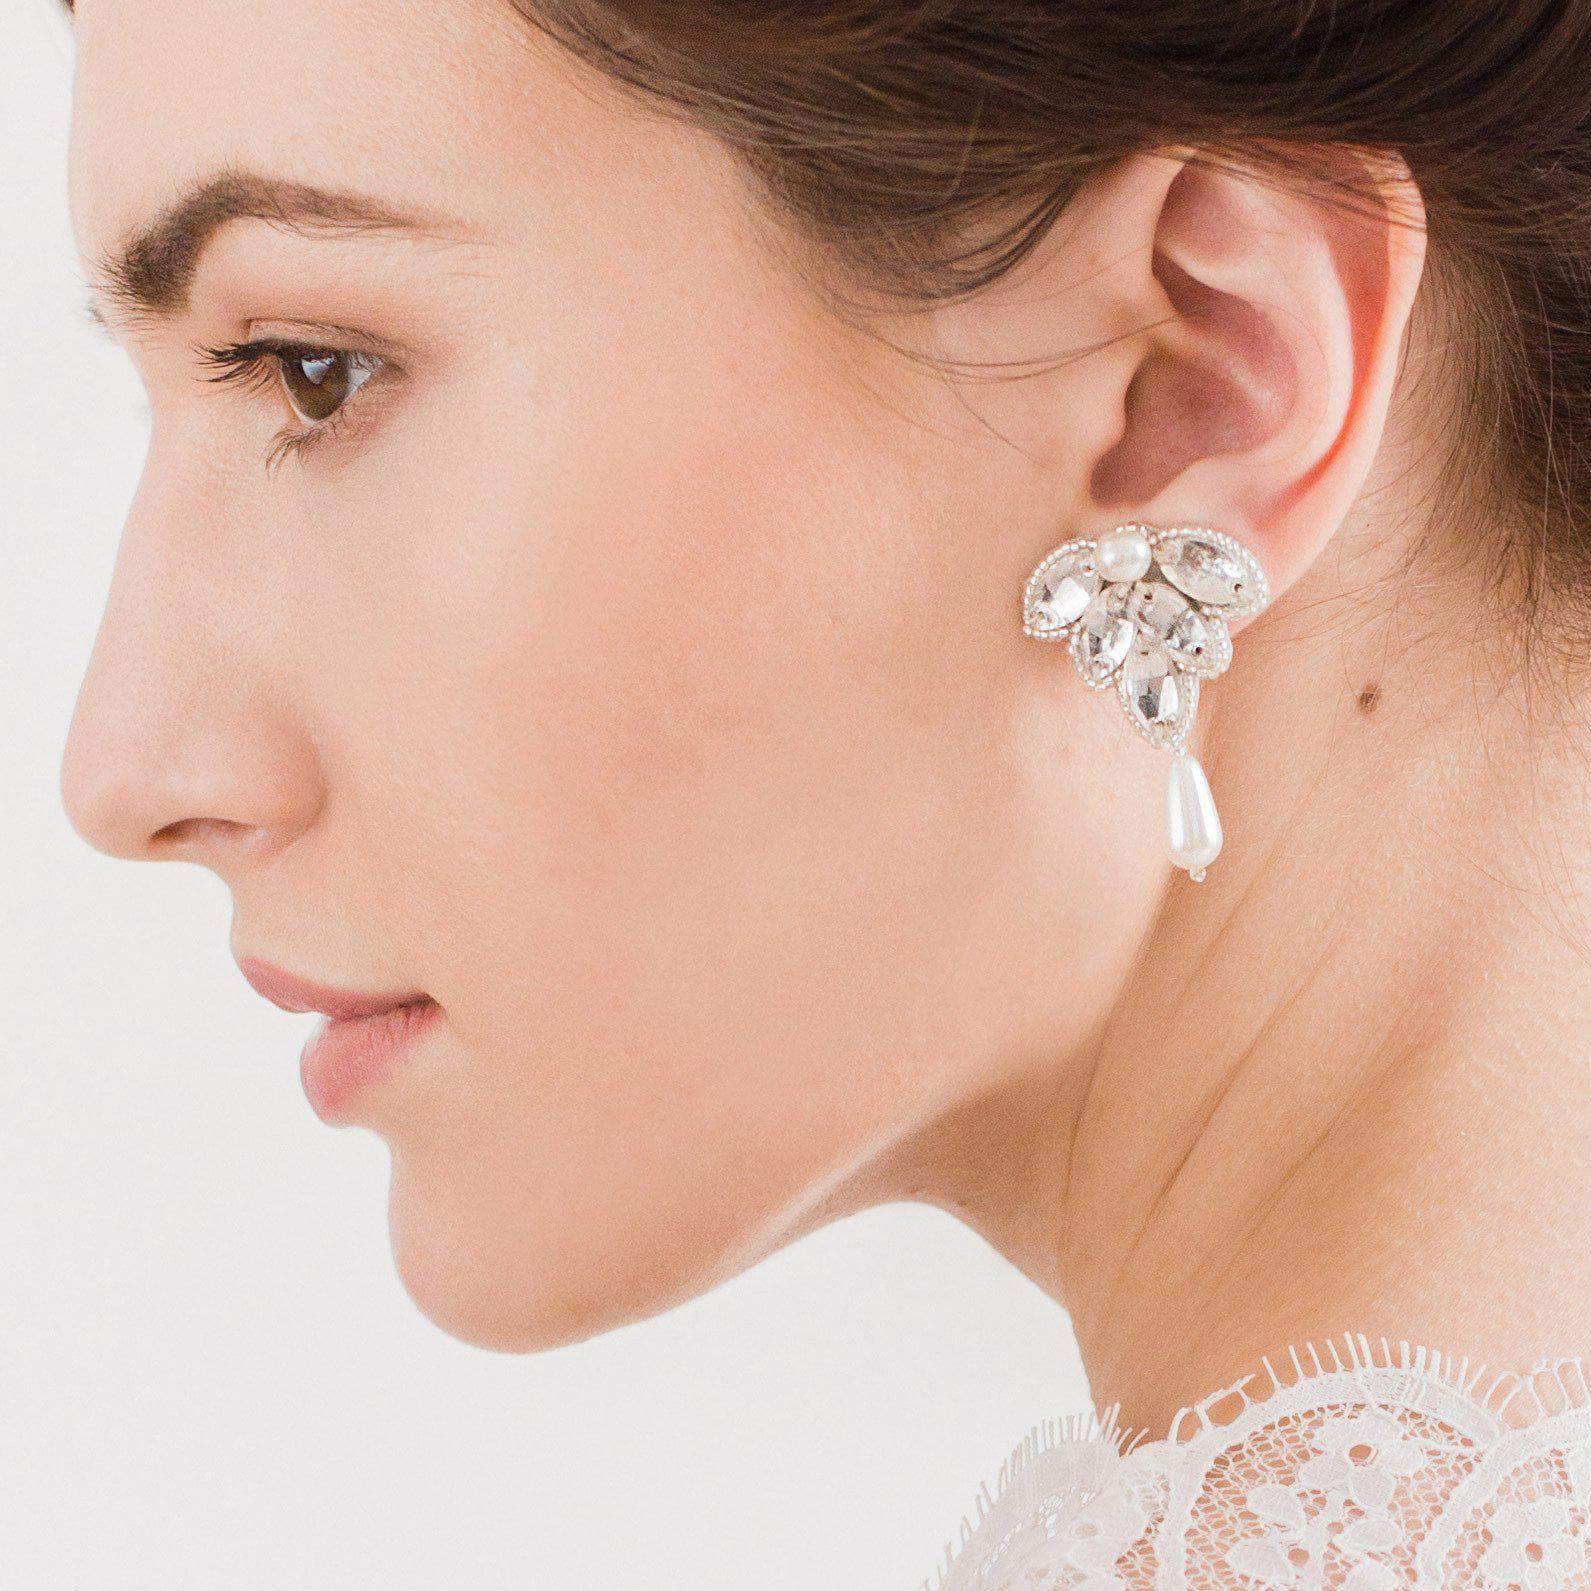 Wedding Earring Silver Crystal wedding earrings silver and crystal - 'Florence' slight discolouration on one crystal